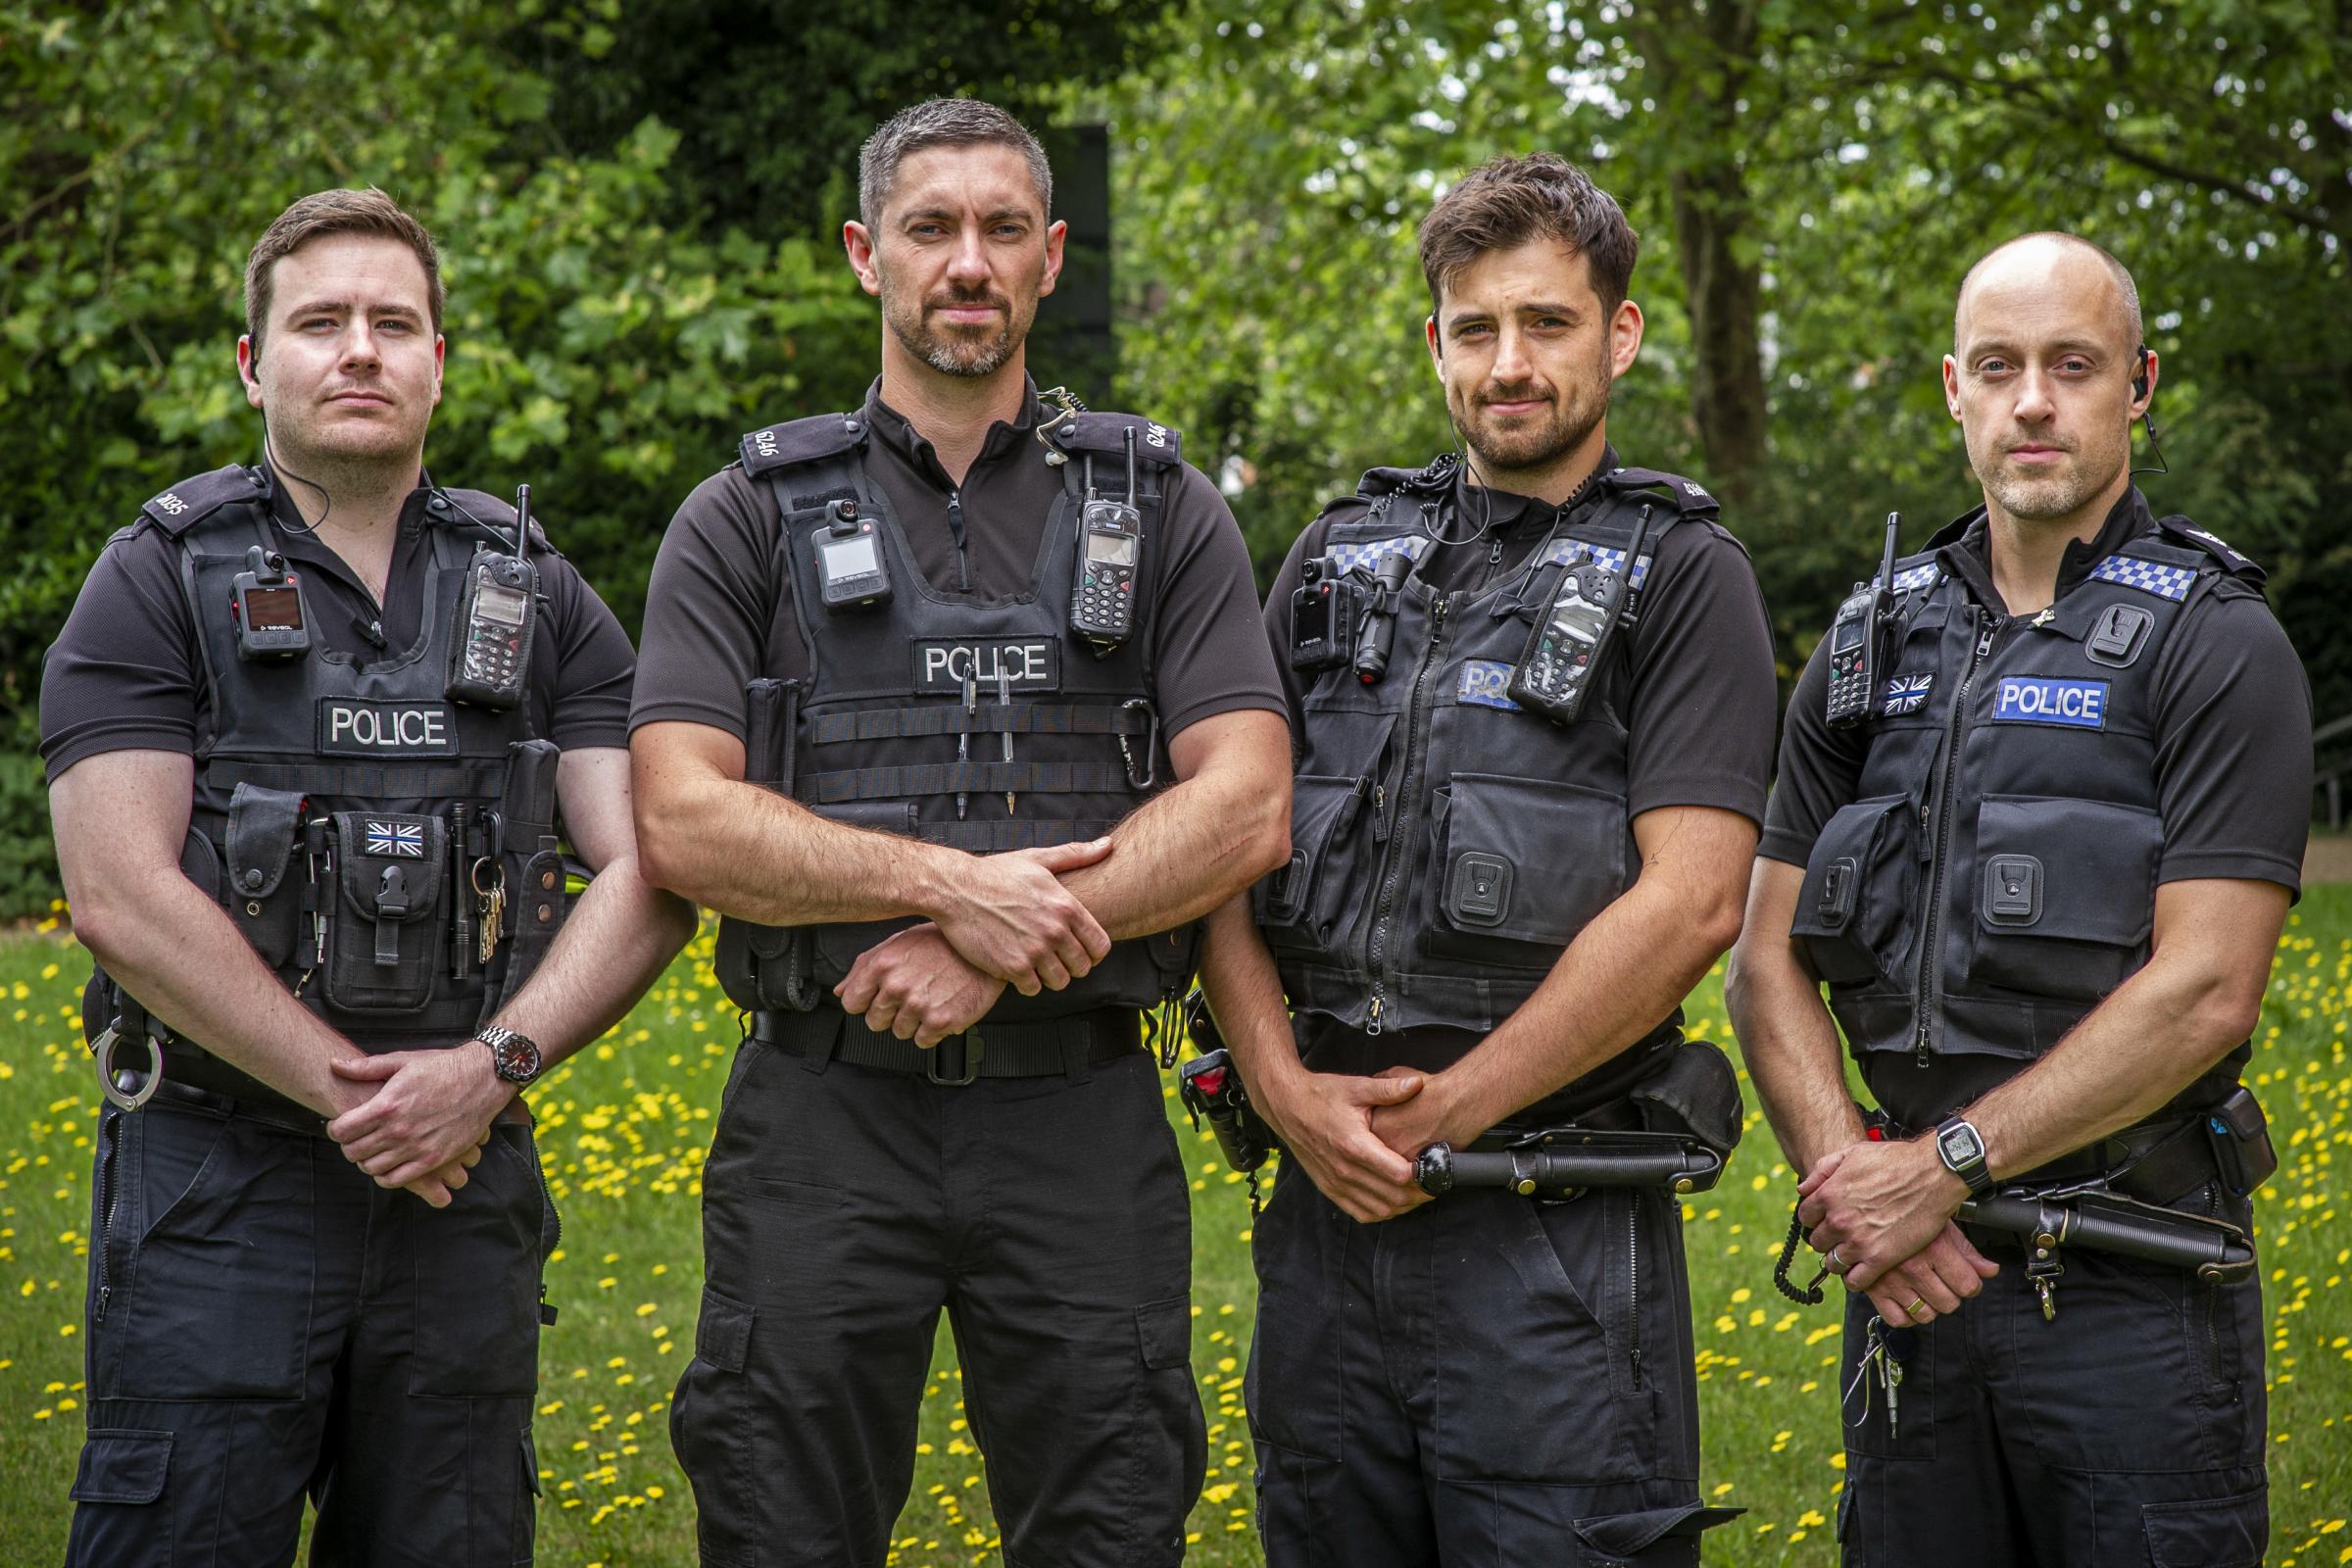 TVP Bravery Nominees, Reading. Pictured left to right, an image of PC James Packman, PC Liam King, PC Liam Steele and Sgt Iain Watkinson Photography by Jason Bye t: 07966 173 930 e: mail@jasonbye.com w: http://www.jasonbye.com